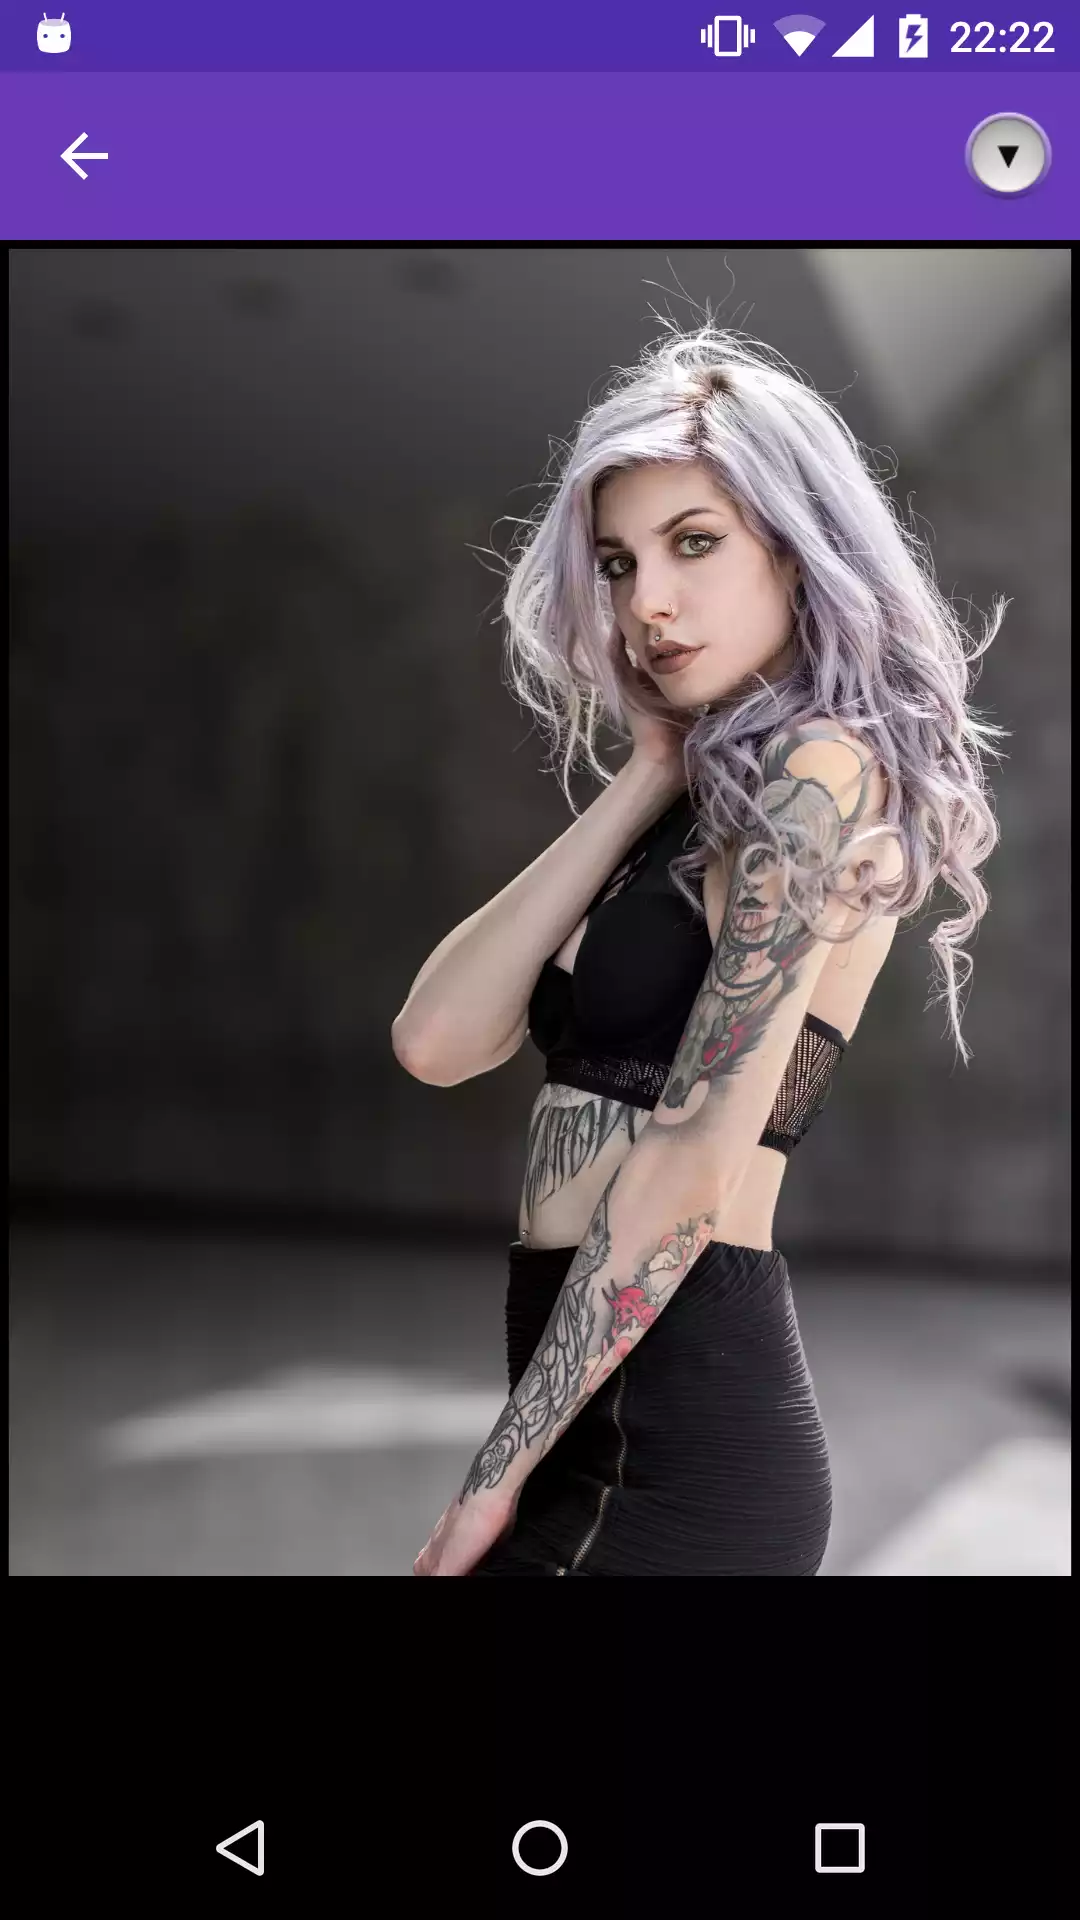 Tattoo Wallpapers picture,girls,baixar,with,hentai,porn,android,sex,for,apps,pic,pornstars,download,wallpaper,henta,photos,gay,erotic,mobile,caprice,app,wallpapers,pictures,amateur,anime,sexy,tattoo